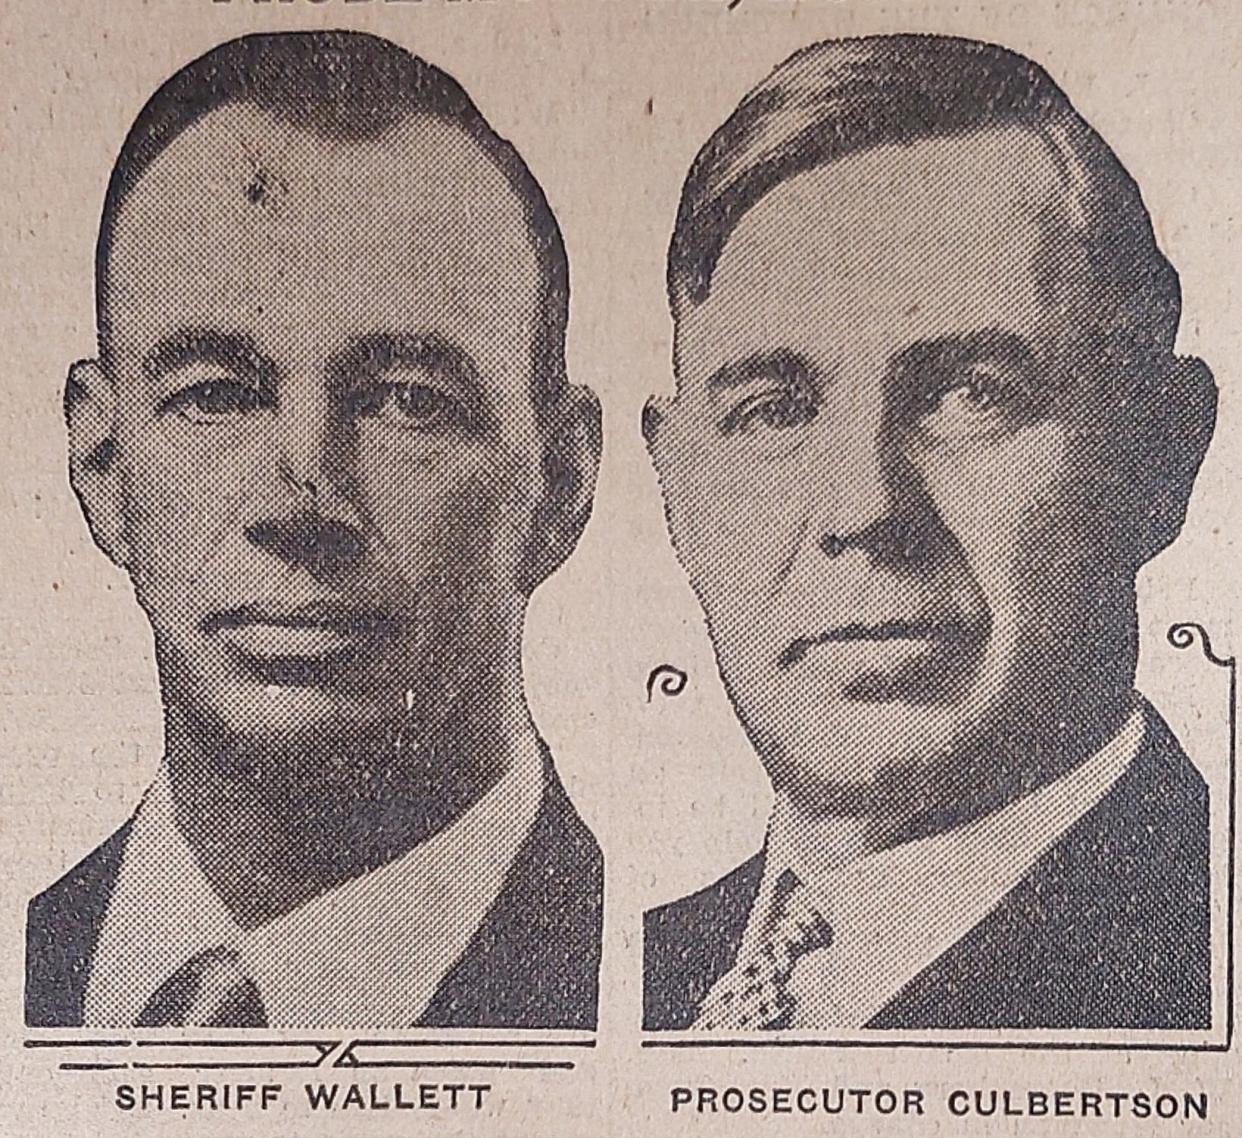 A photo from the Ashland Times-Gazette in 1931, when Sheriff Wallett and Prosecutor Culbertson were being kept quite busy.